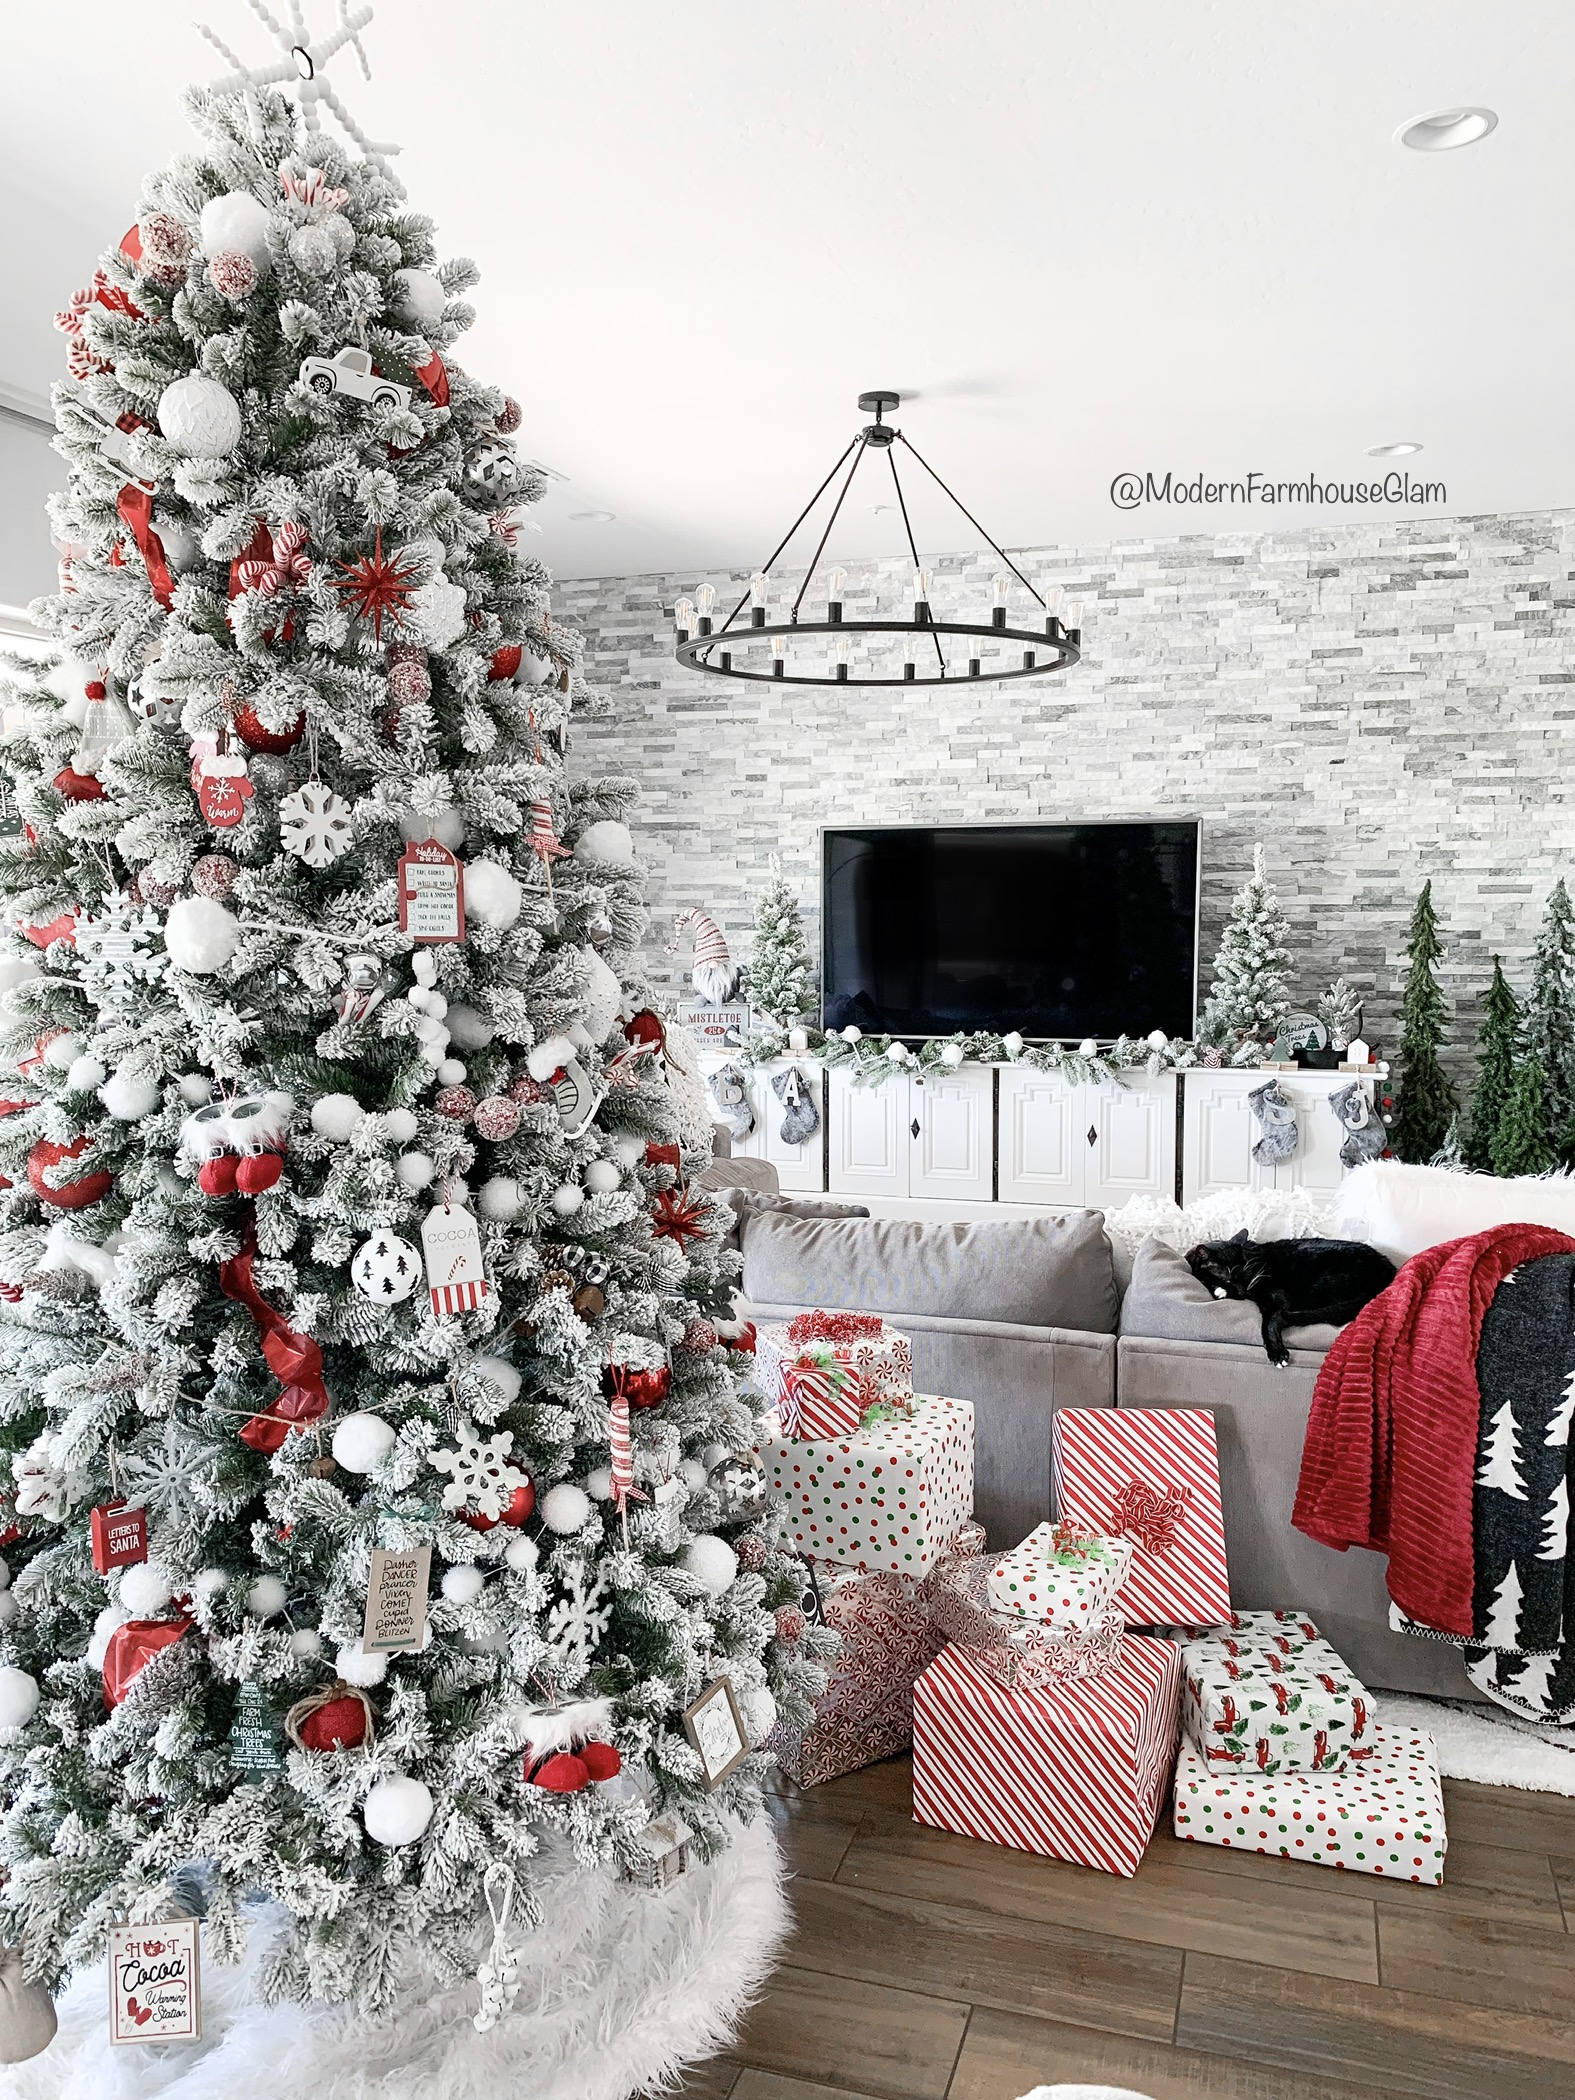 How beautiful is this flocked Christmas Tree decorated with